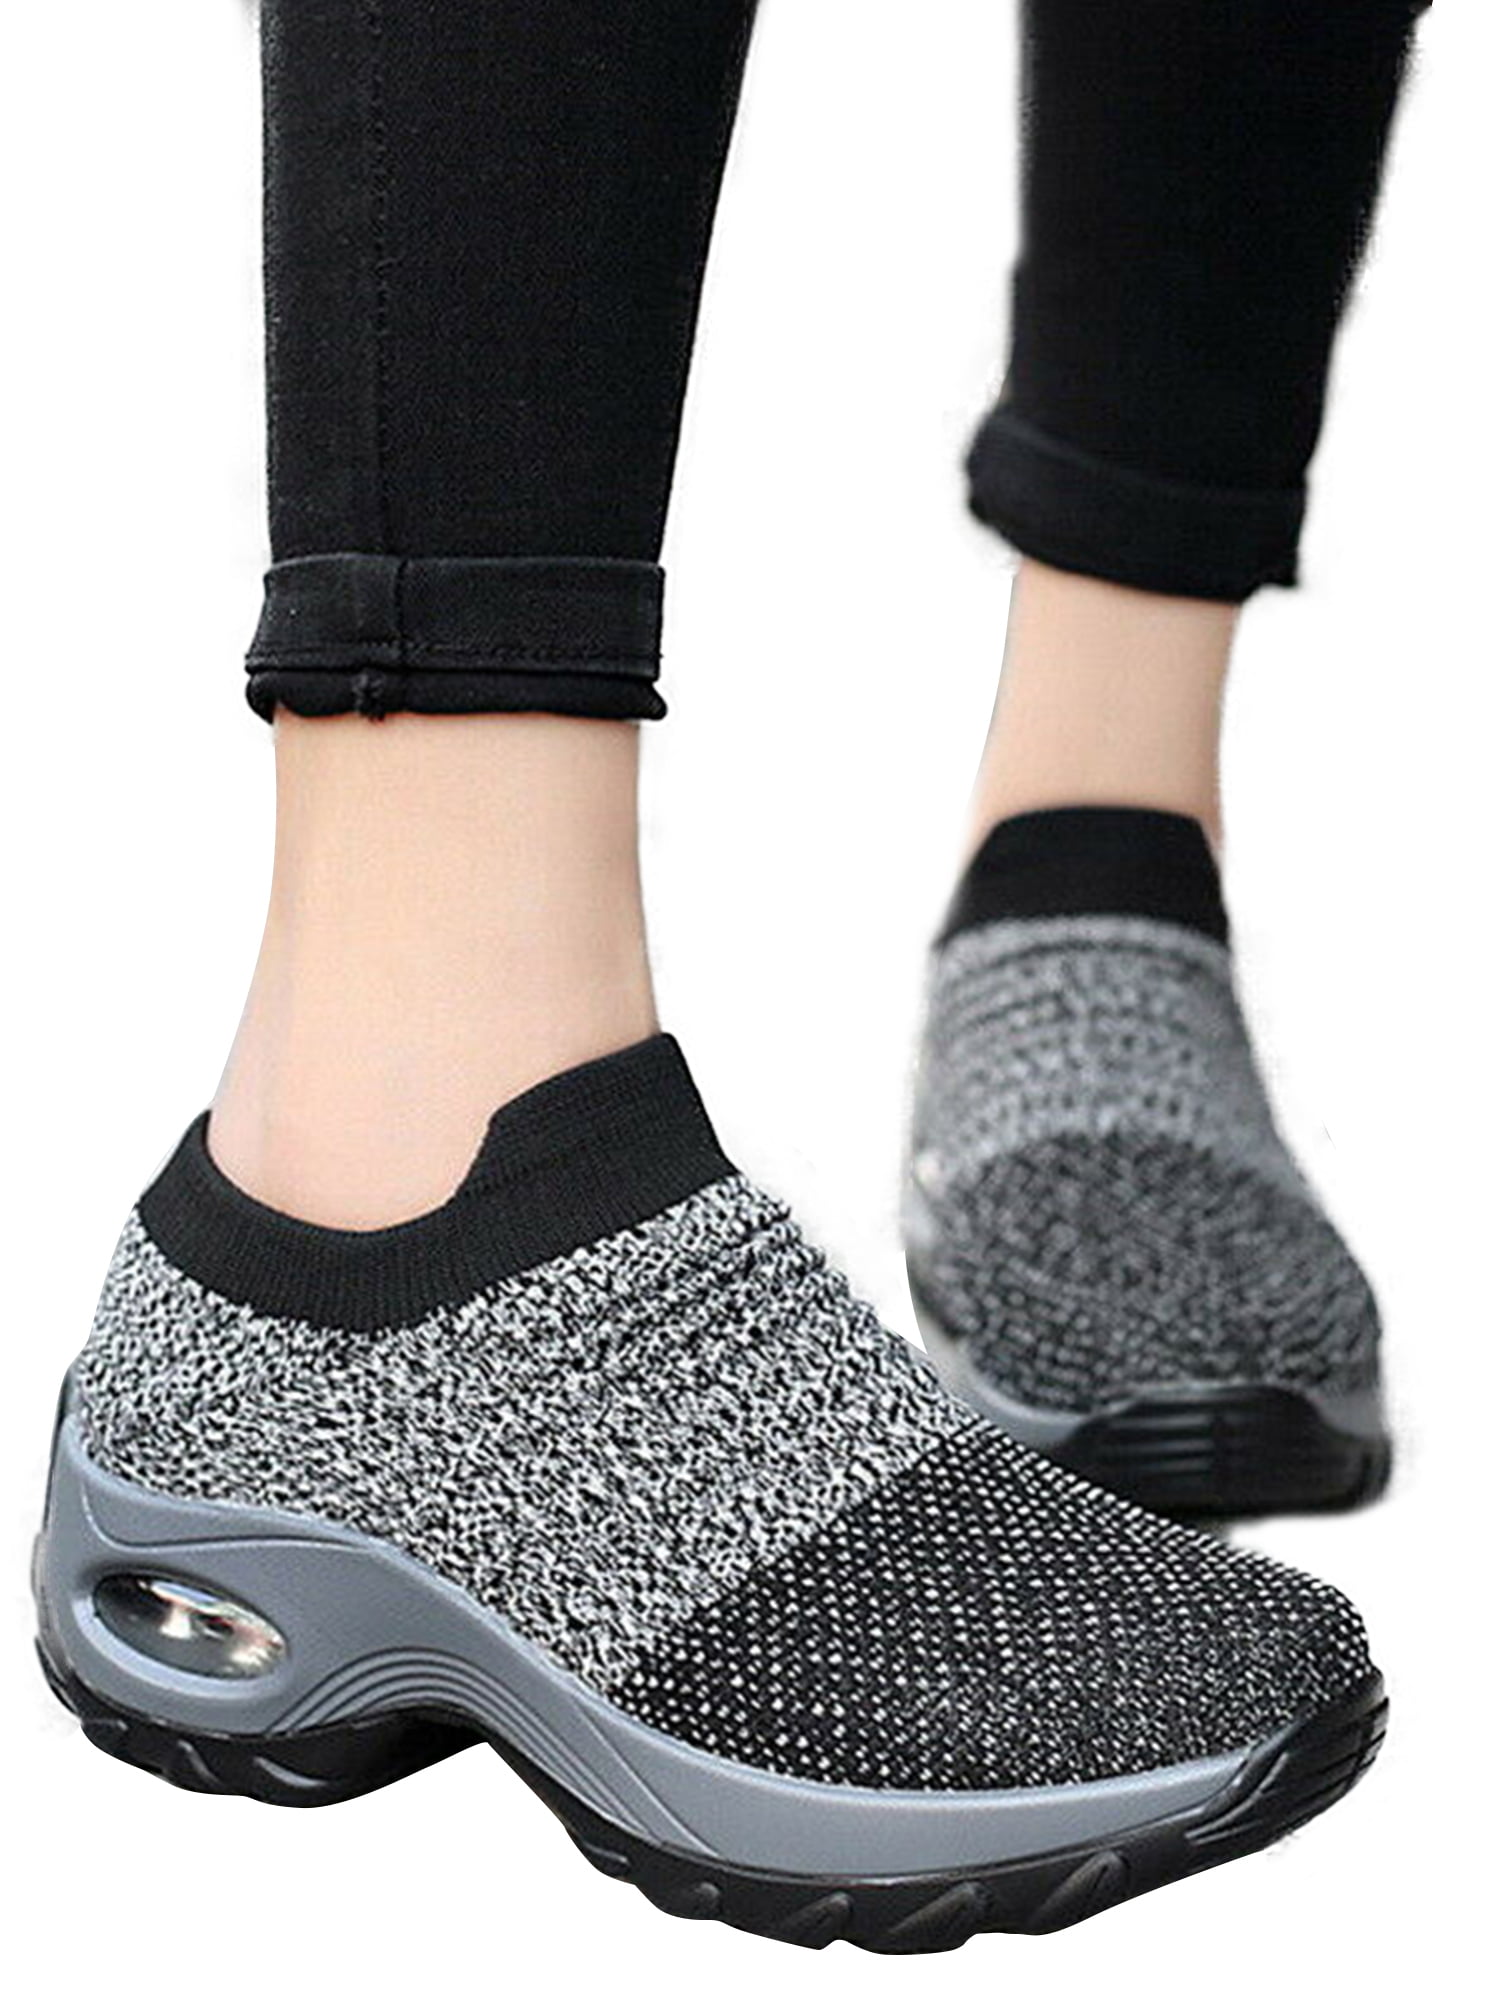 slip on exercise shoes